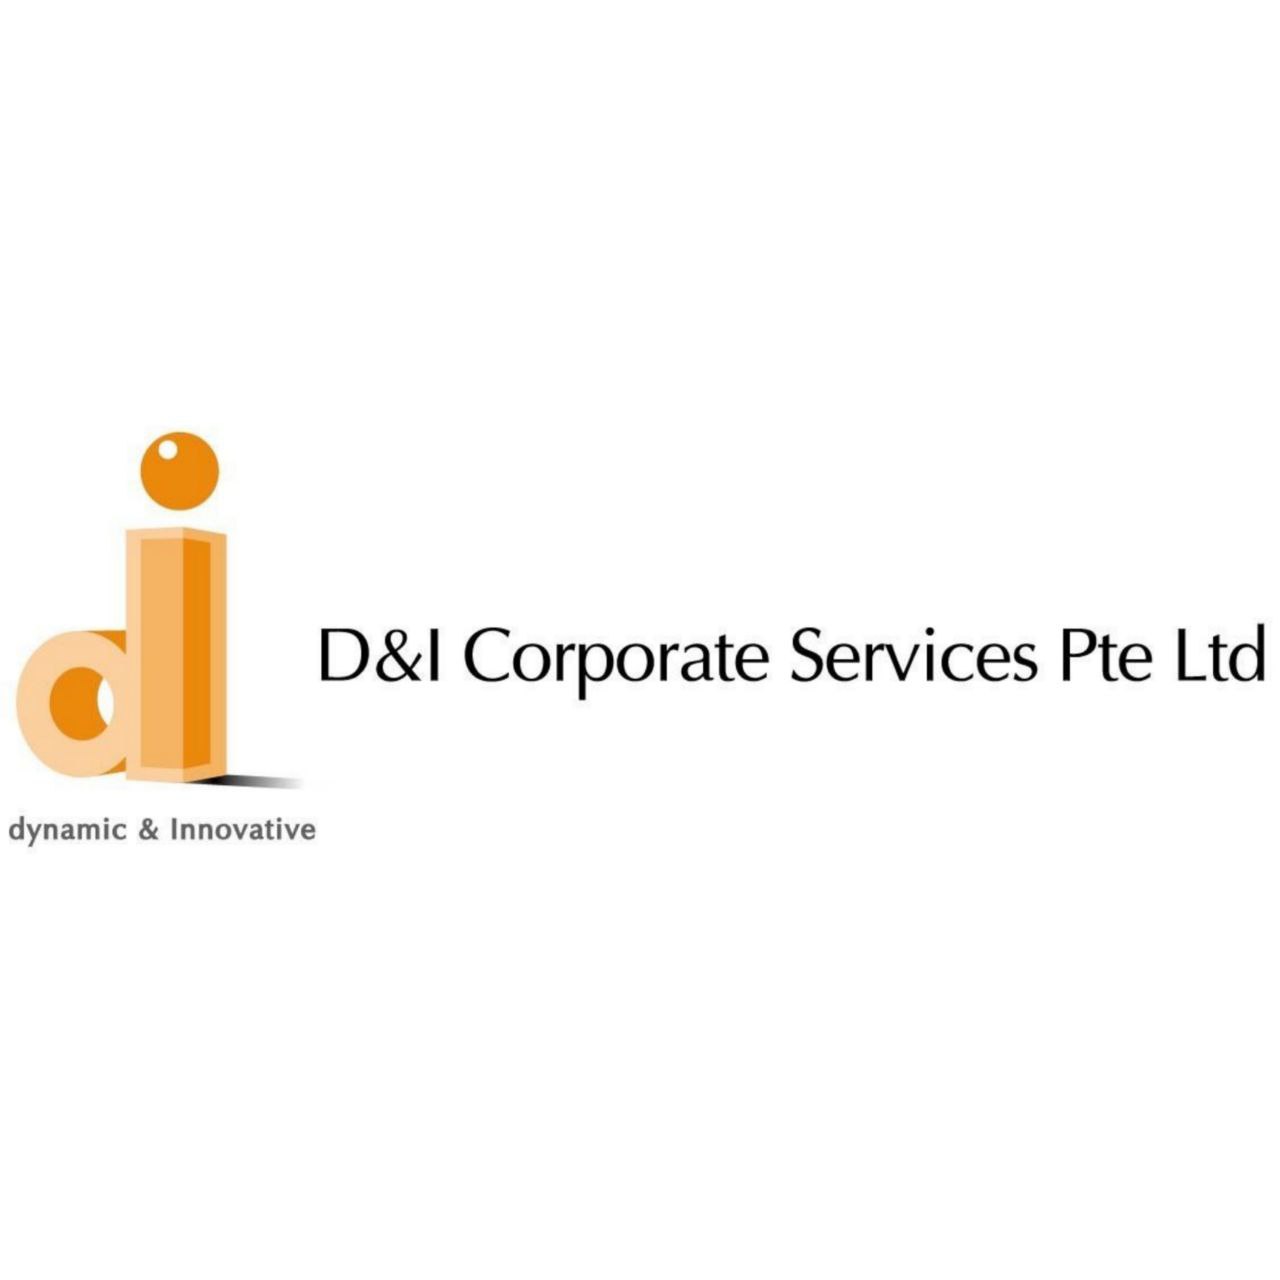 D&I Corporate Services